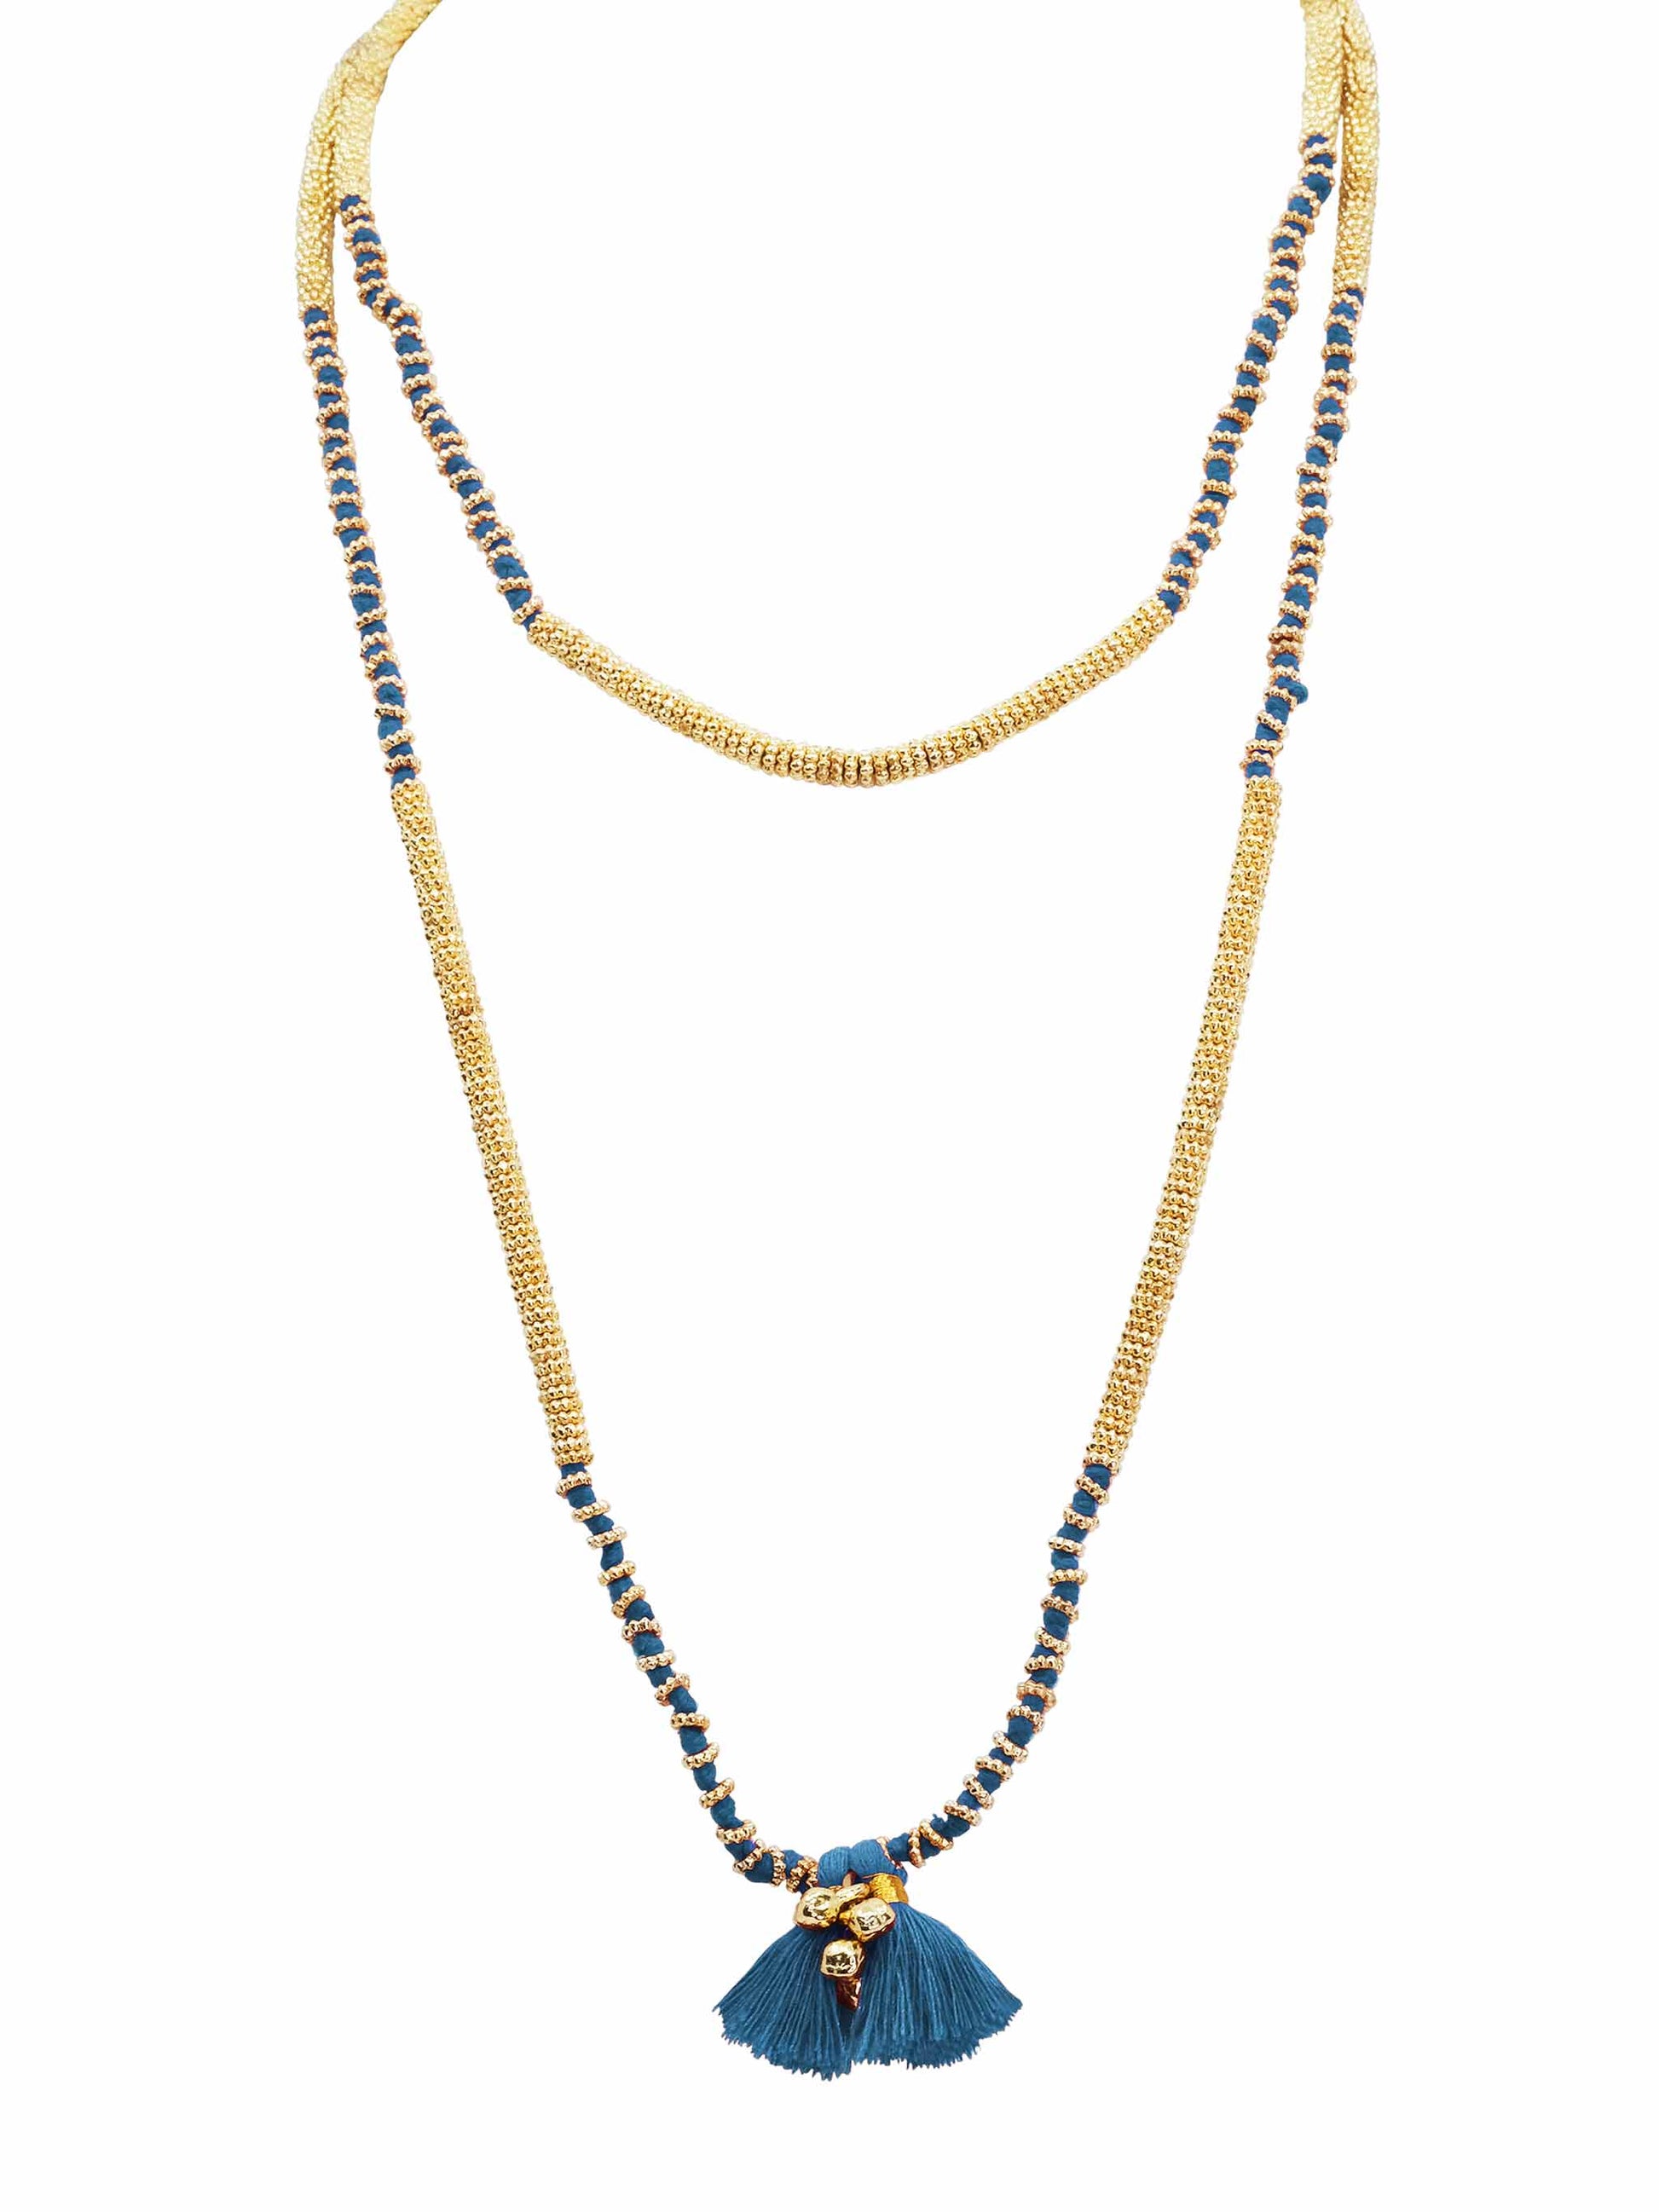 Lariya Gold Tone Beaded Long Necklace with Teal Blue Tassels